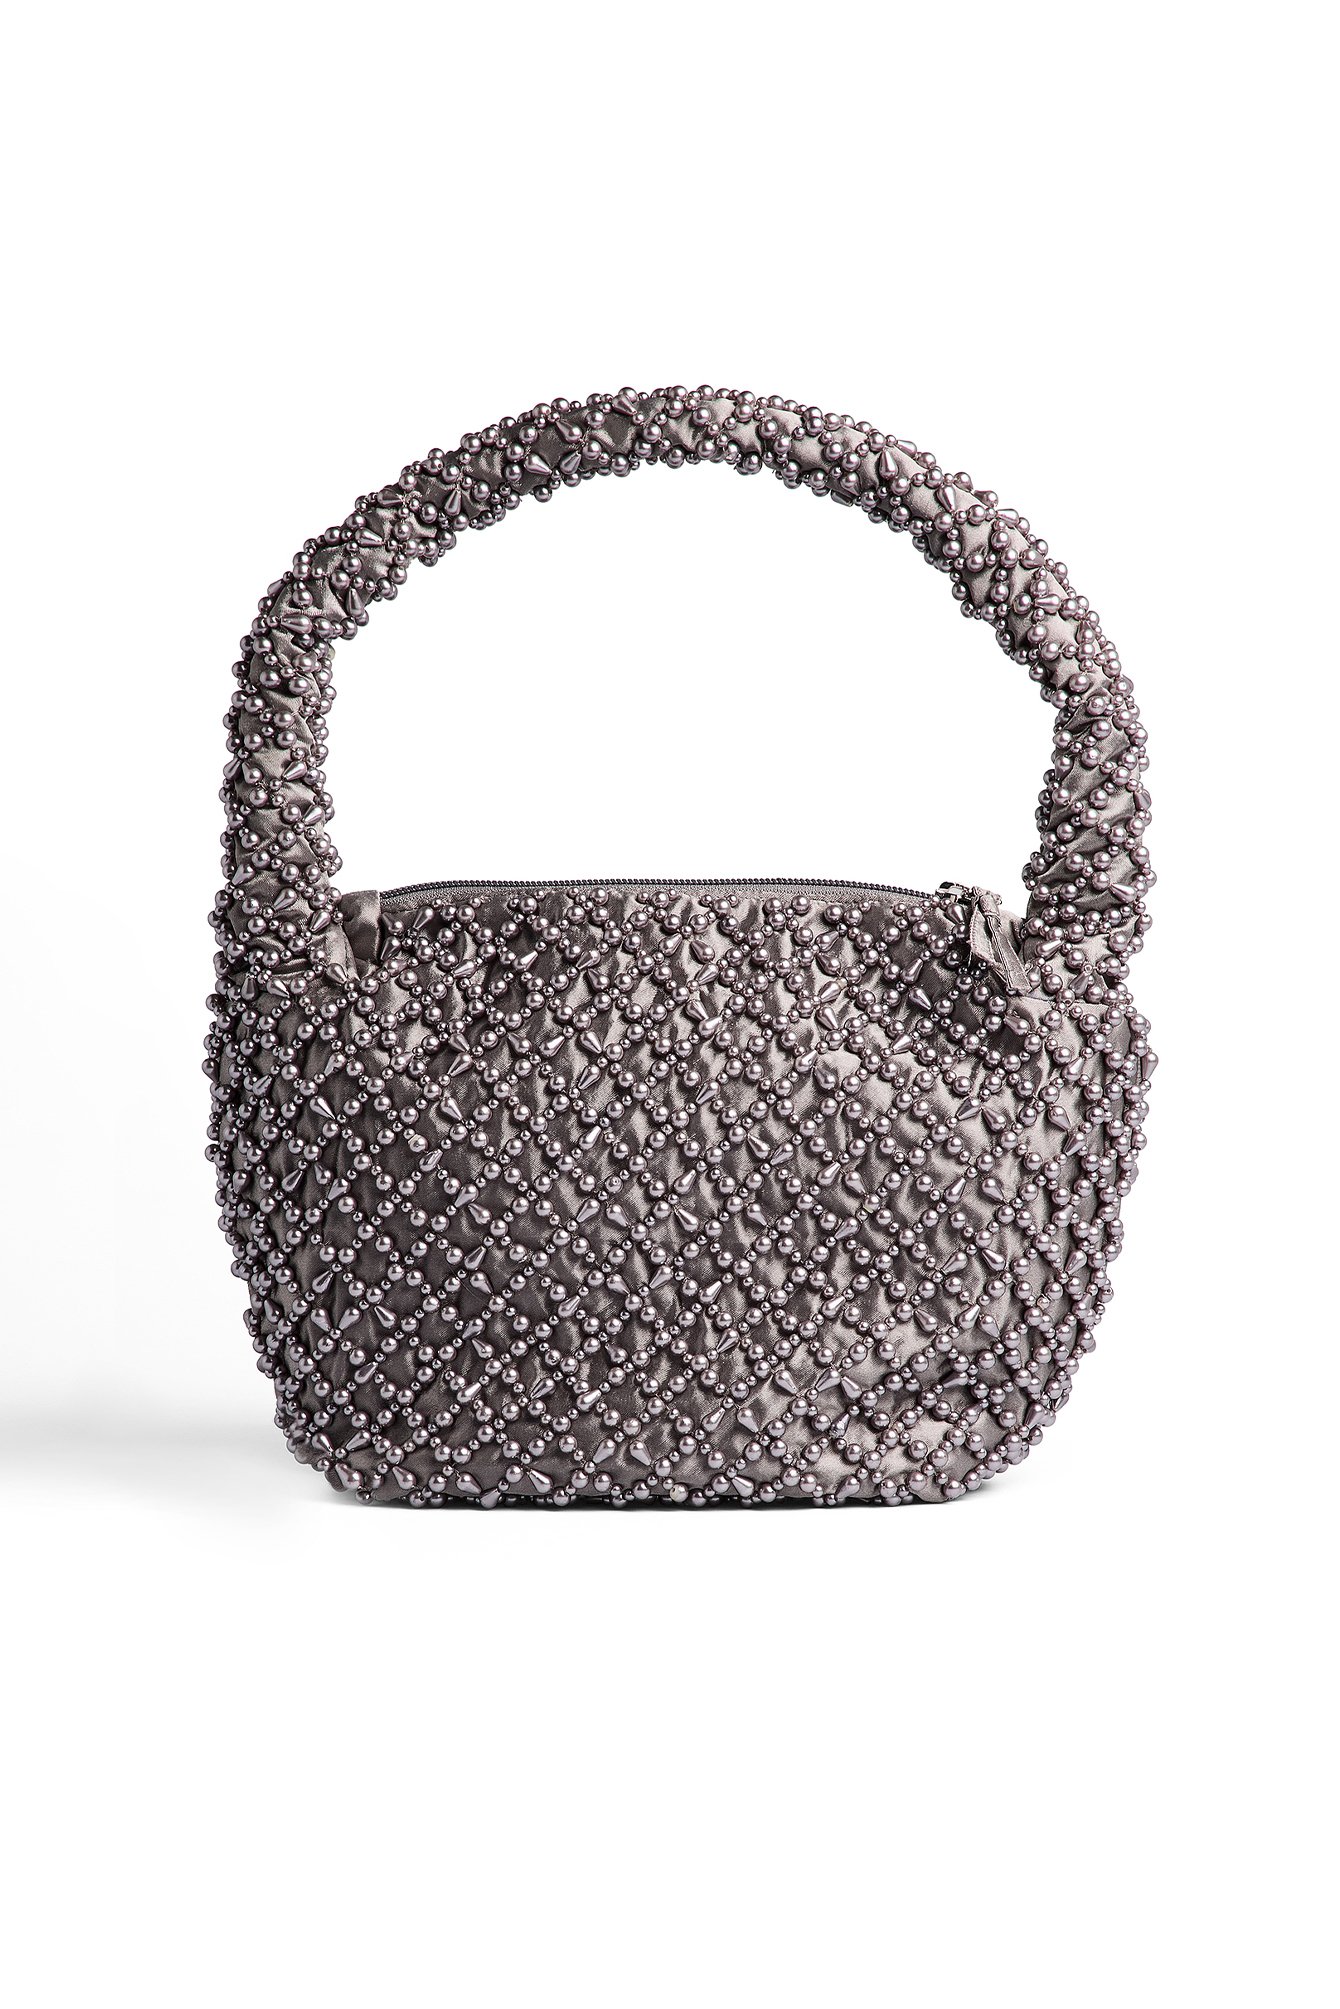 Charcoal Grey Beaded Rounded Bag